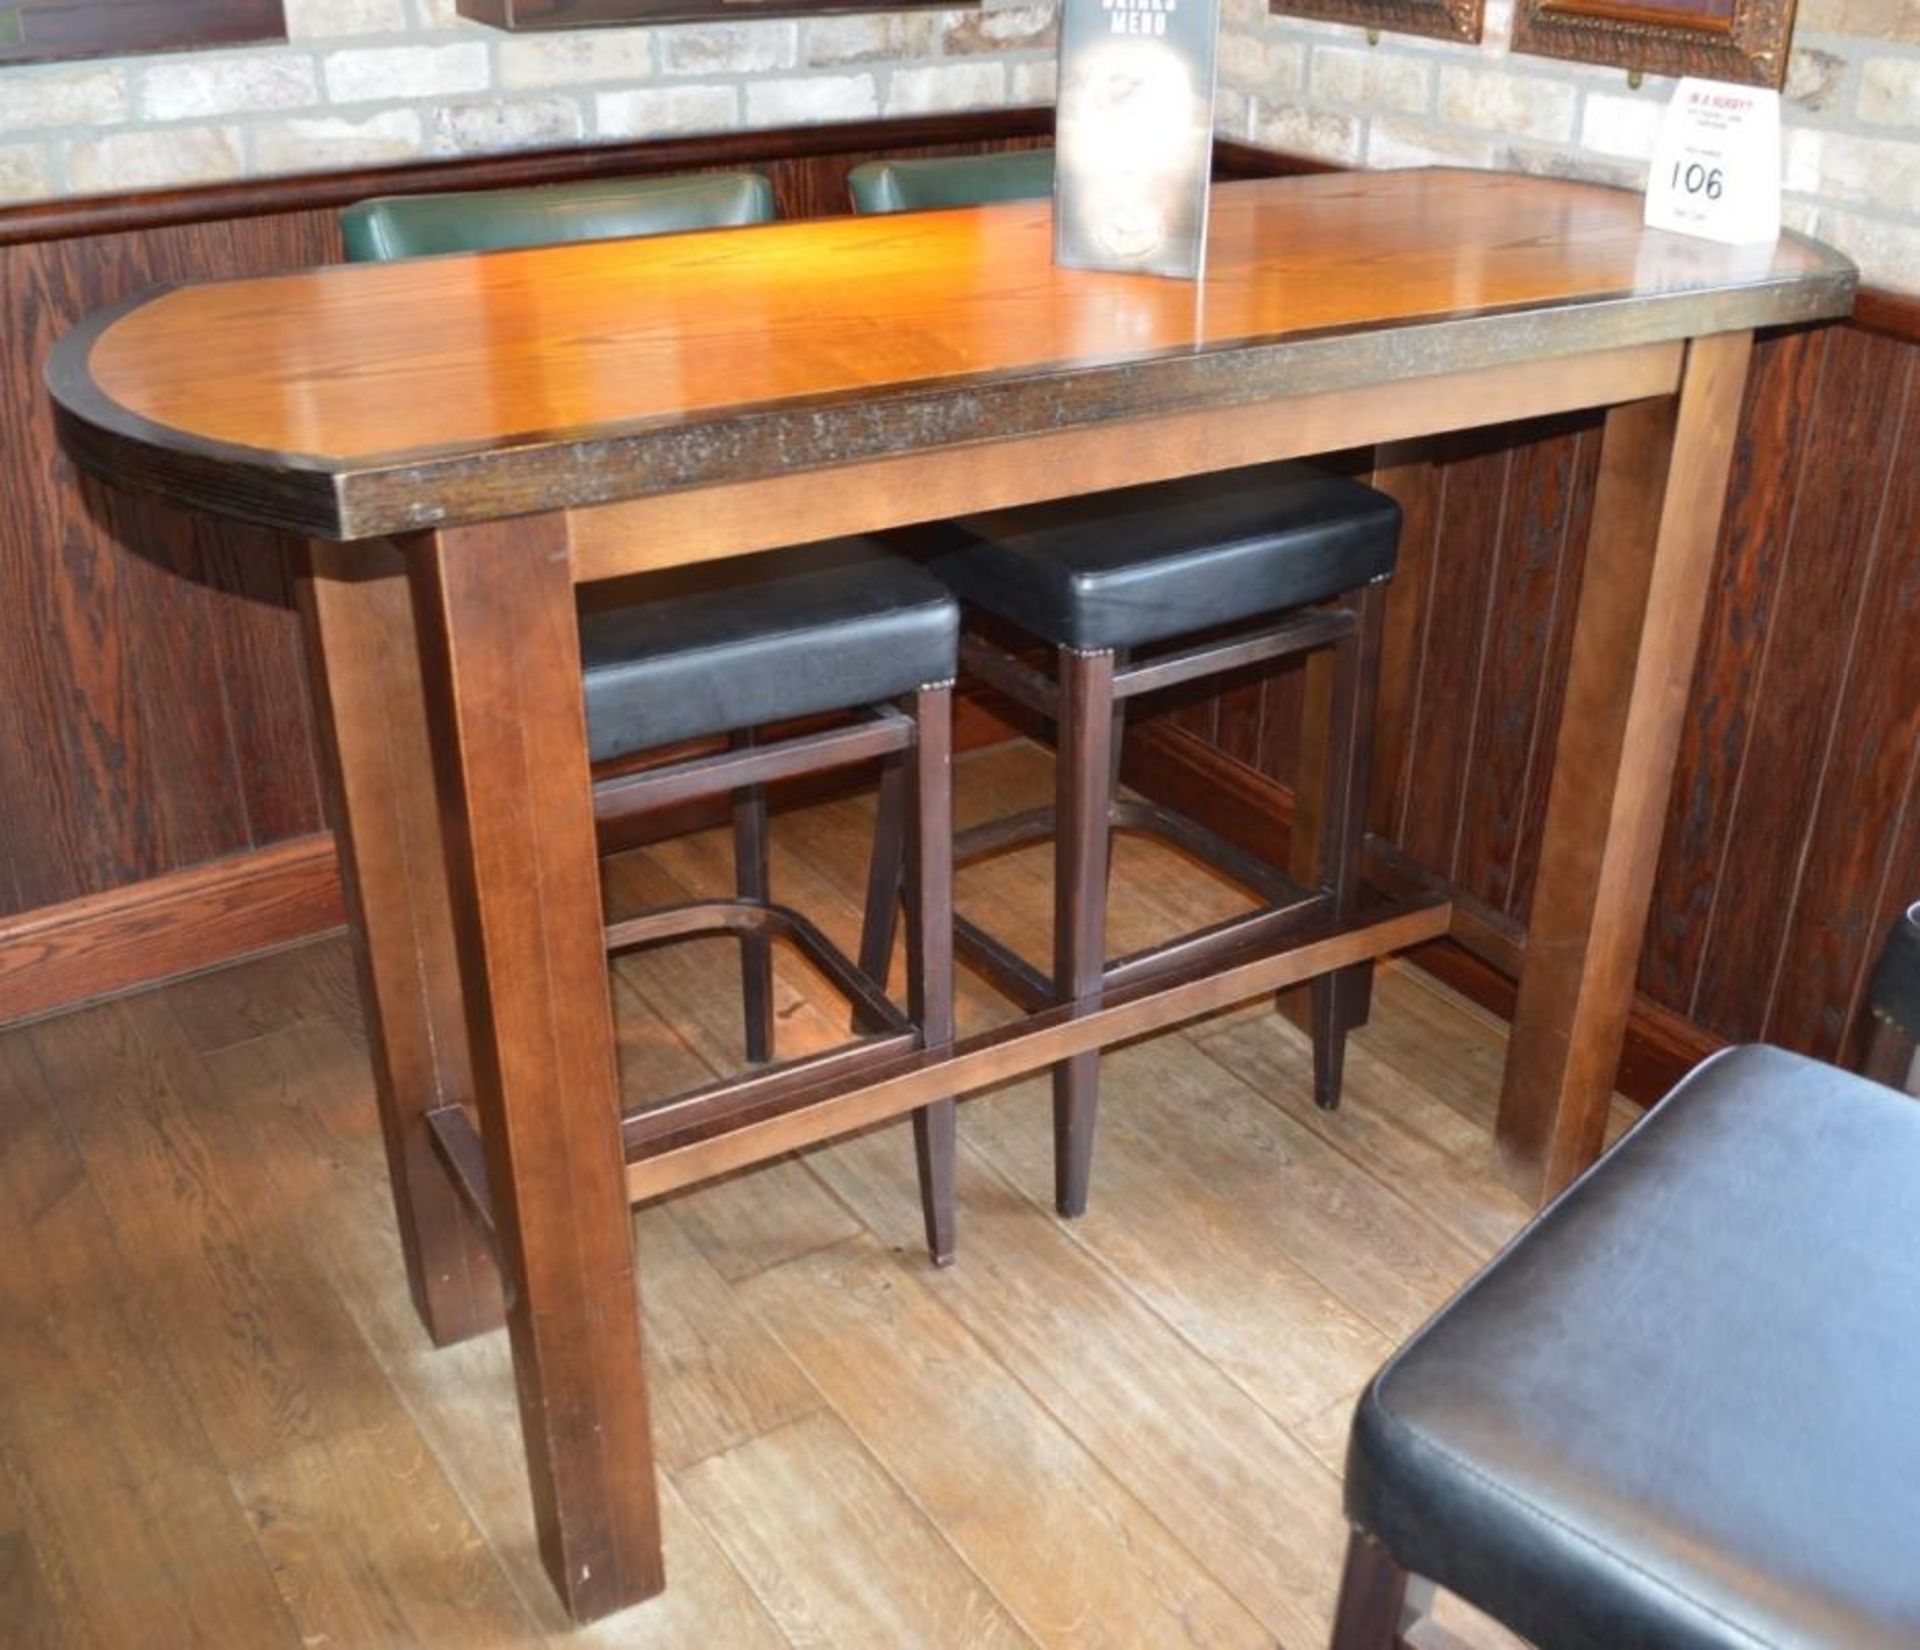 1 x Rectangular Poser Table With Four Contemporary Bar Stools - Stunning Finish With Straight and - Image 4 of 8